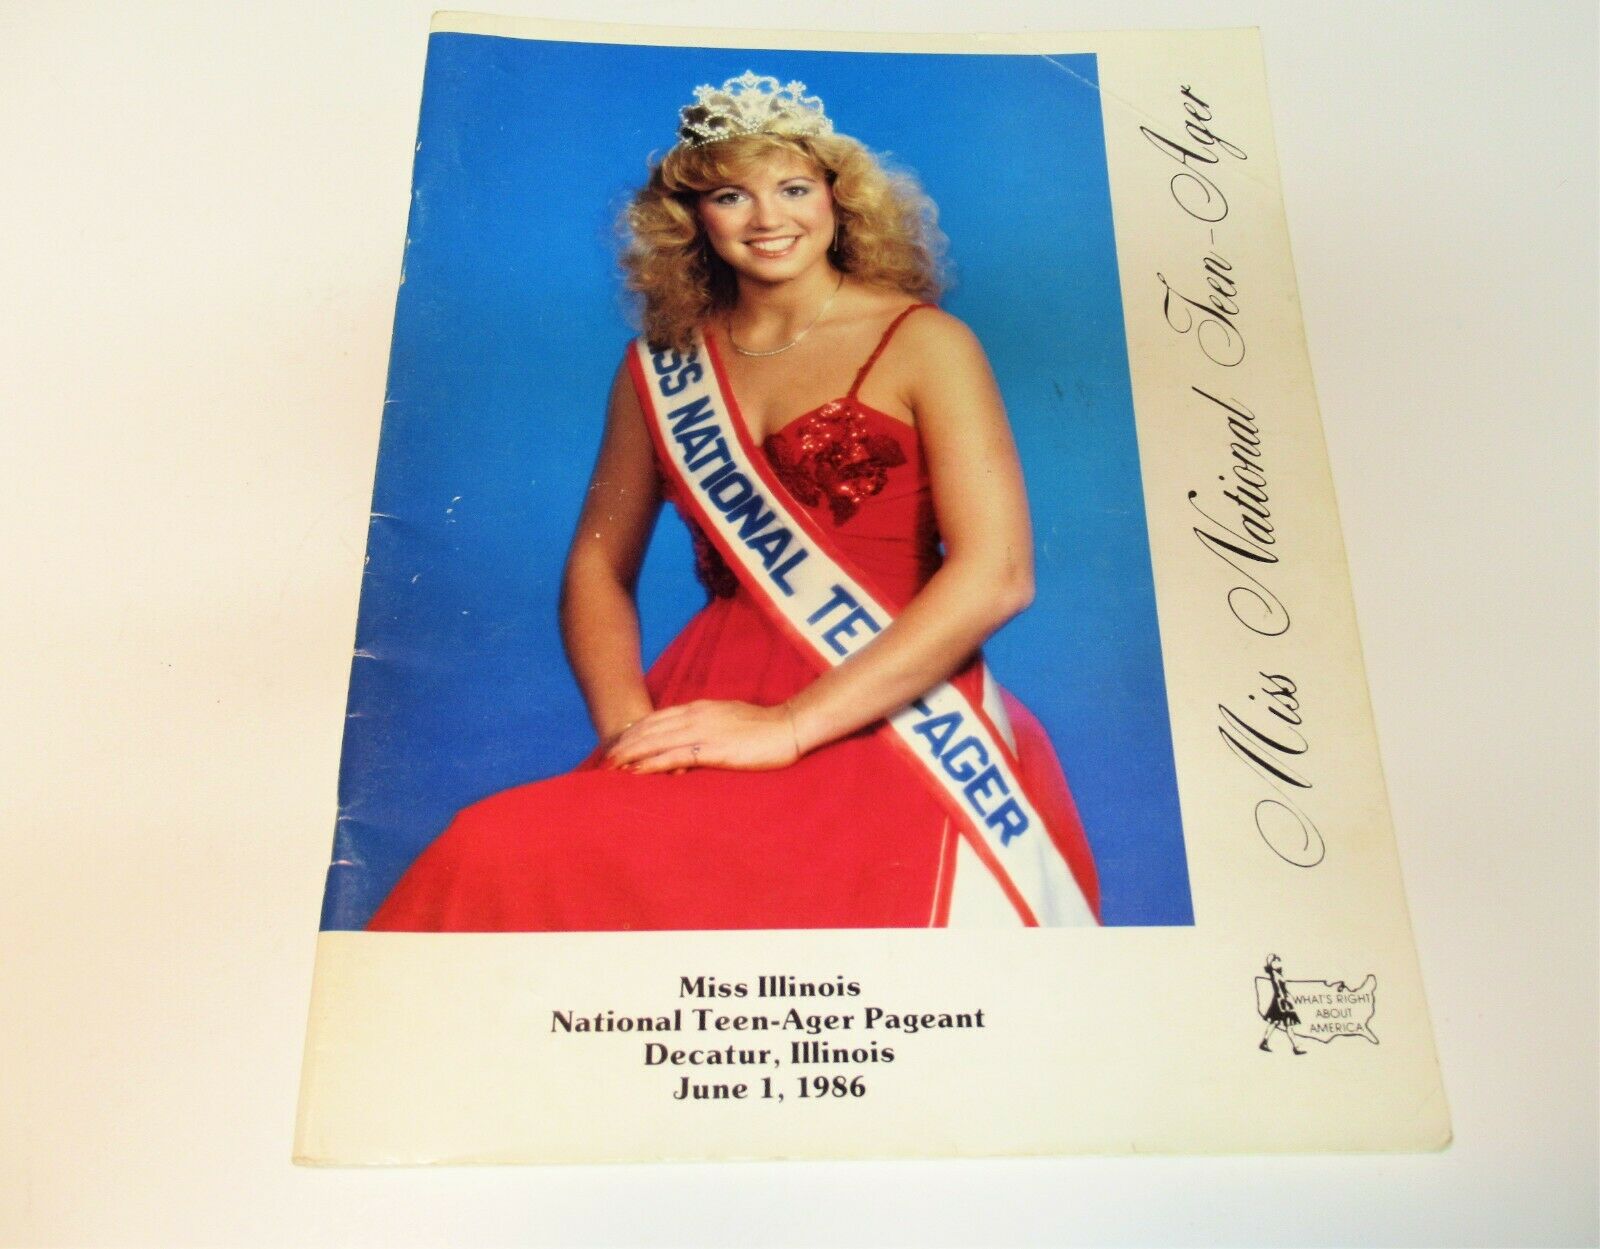 VINTAGE TEEN-AGER BEAUTY PAGEANT PROGRAM METRO CHICAGO JUNE 1, 1986 GOOD COND!!!